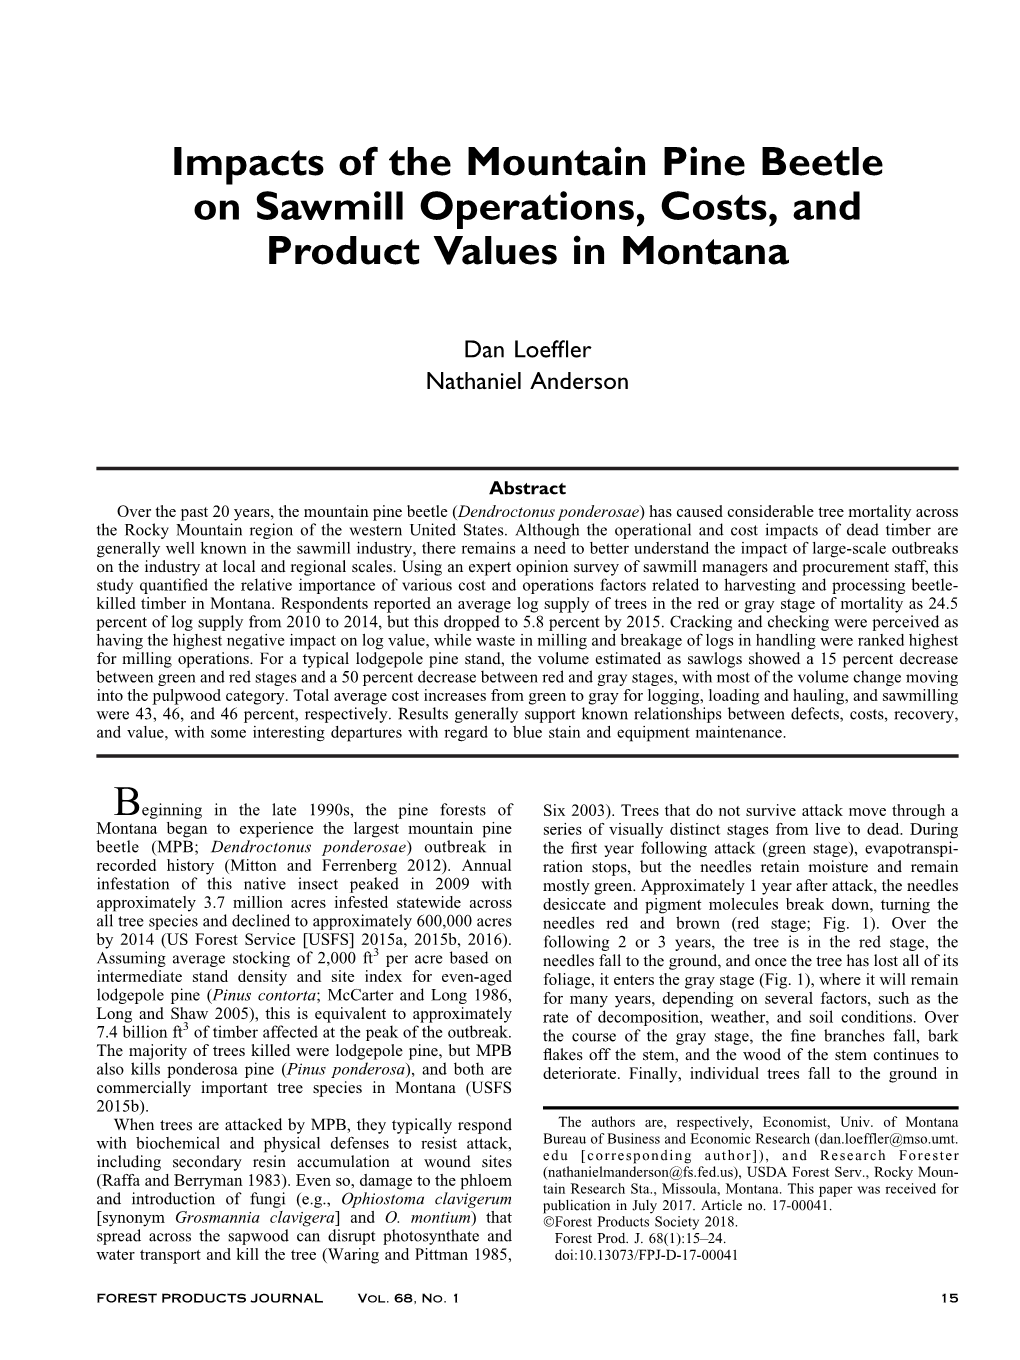 Impacts of the Mountain Pine Beetle on Sawmill Operations, Costs, and Product Values in Montana